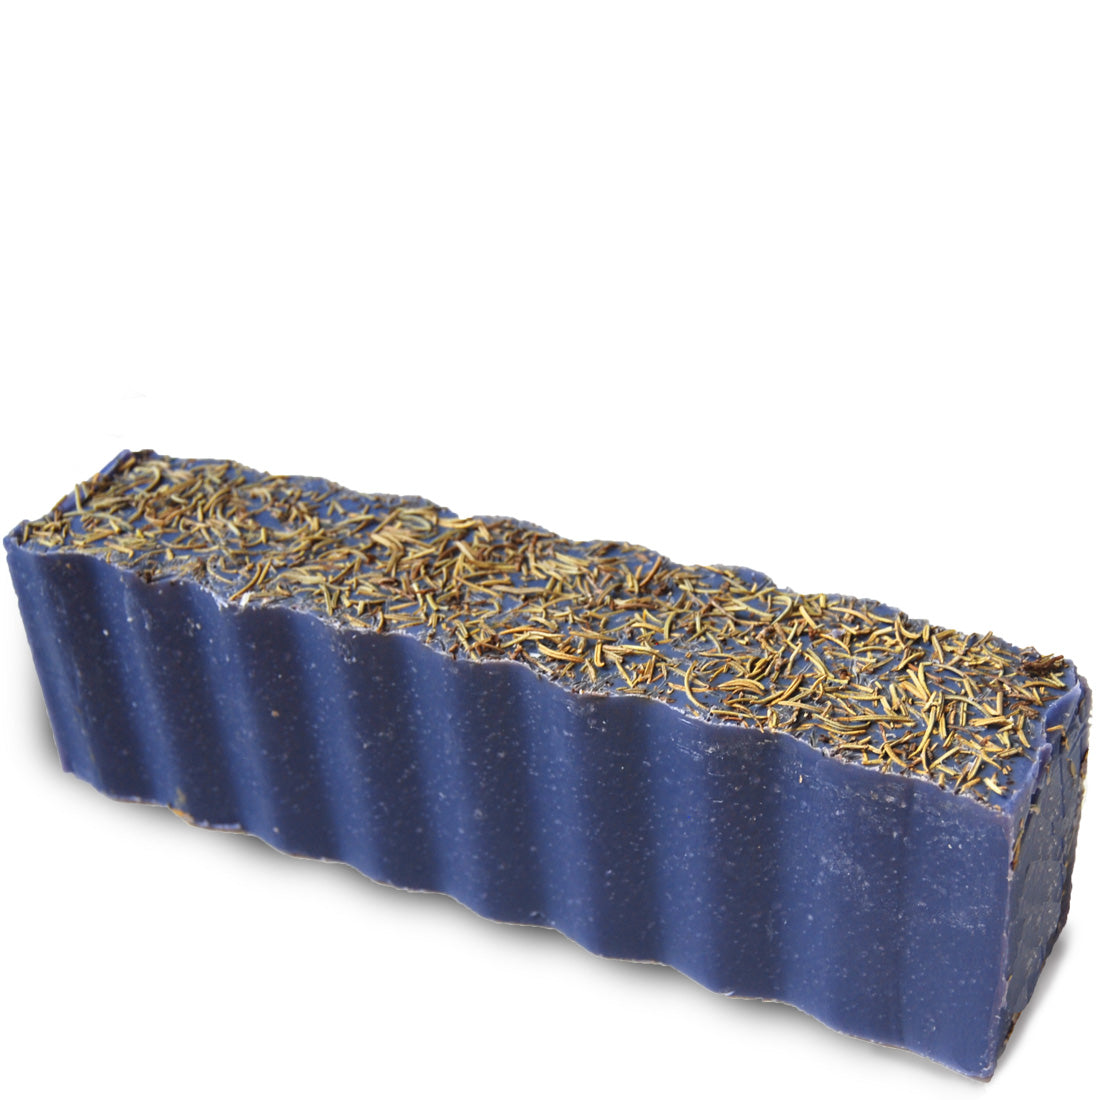 Purple topped with rosemary wavy rectangular 45 ounce brick of lavender and rosemary scented Zum Bar Soap